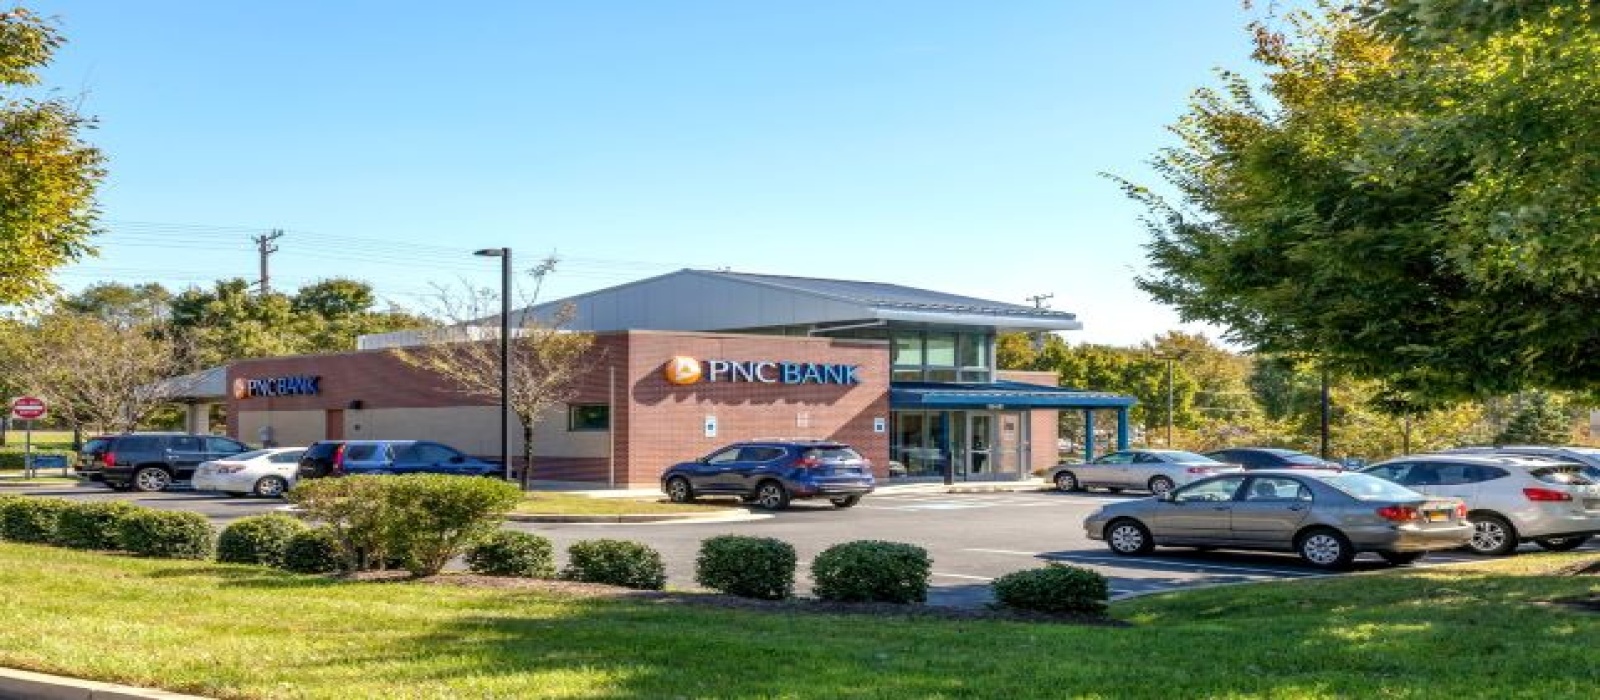 16481 Excalibur Road, Bowie, Maryland 20716, ,Retail,For Sale,16481 Excalibur Road,1091